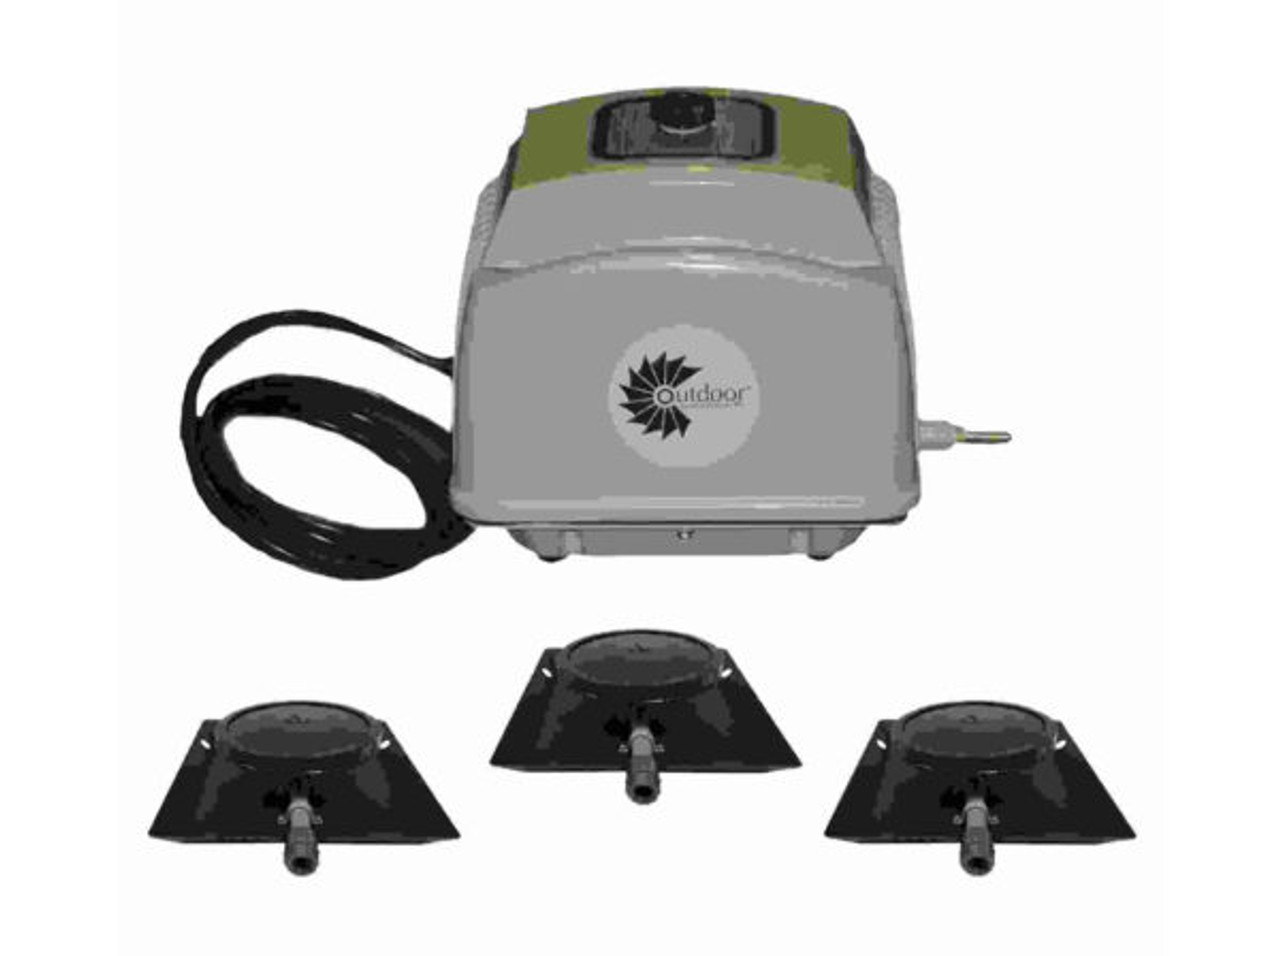 The Shallow Pond OWS AerMaster LD 7.0 Electric Aerator is designed for ponds from 1/4 acre up to 1.5 acre in size with a maximum diffuser placement of 10′ deep!